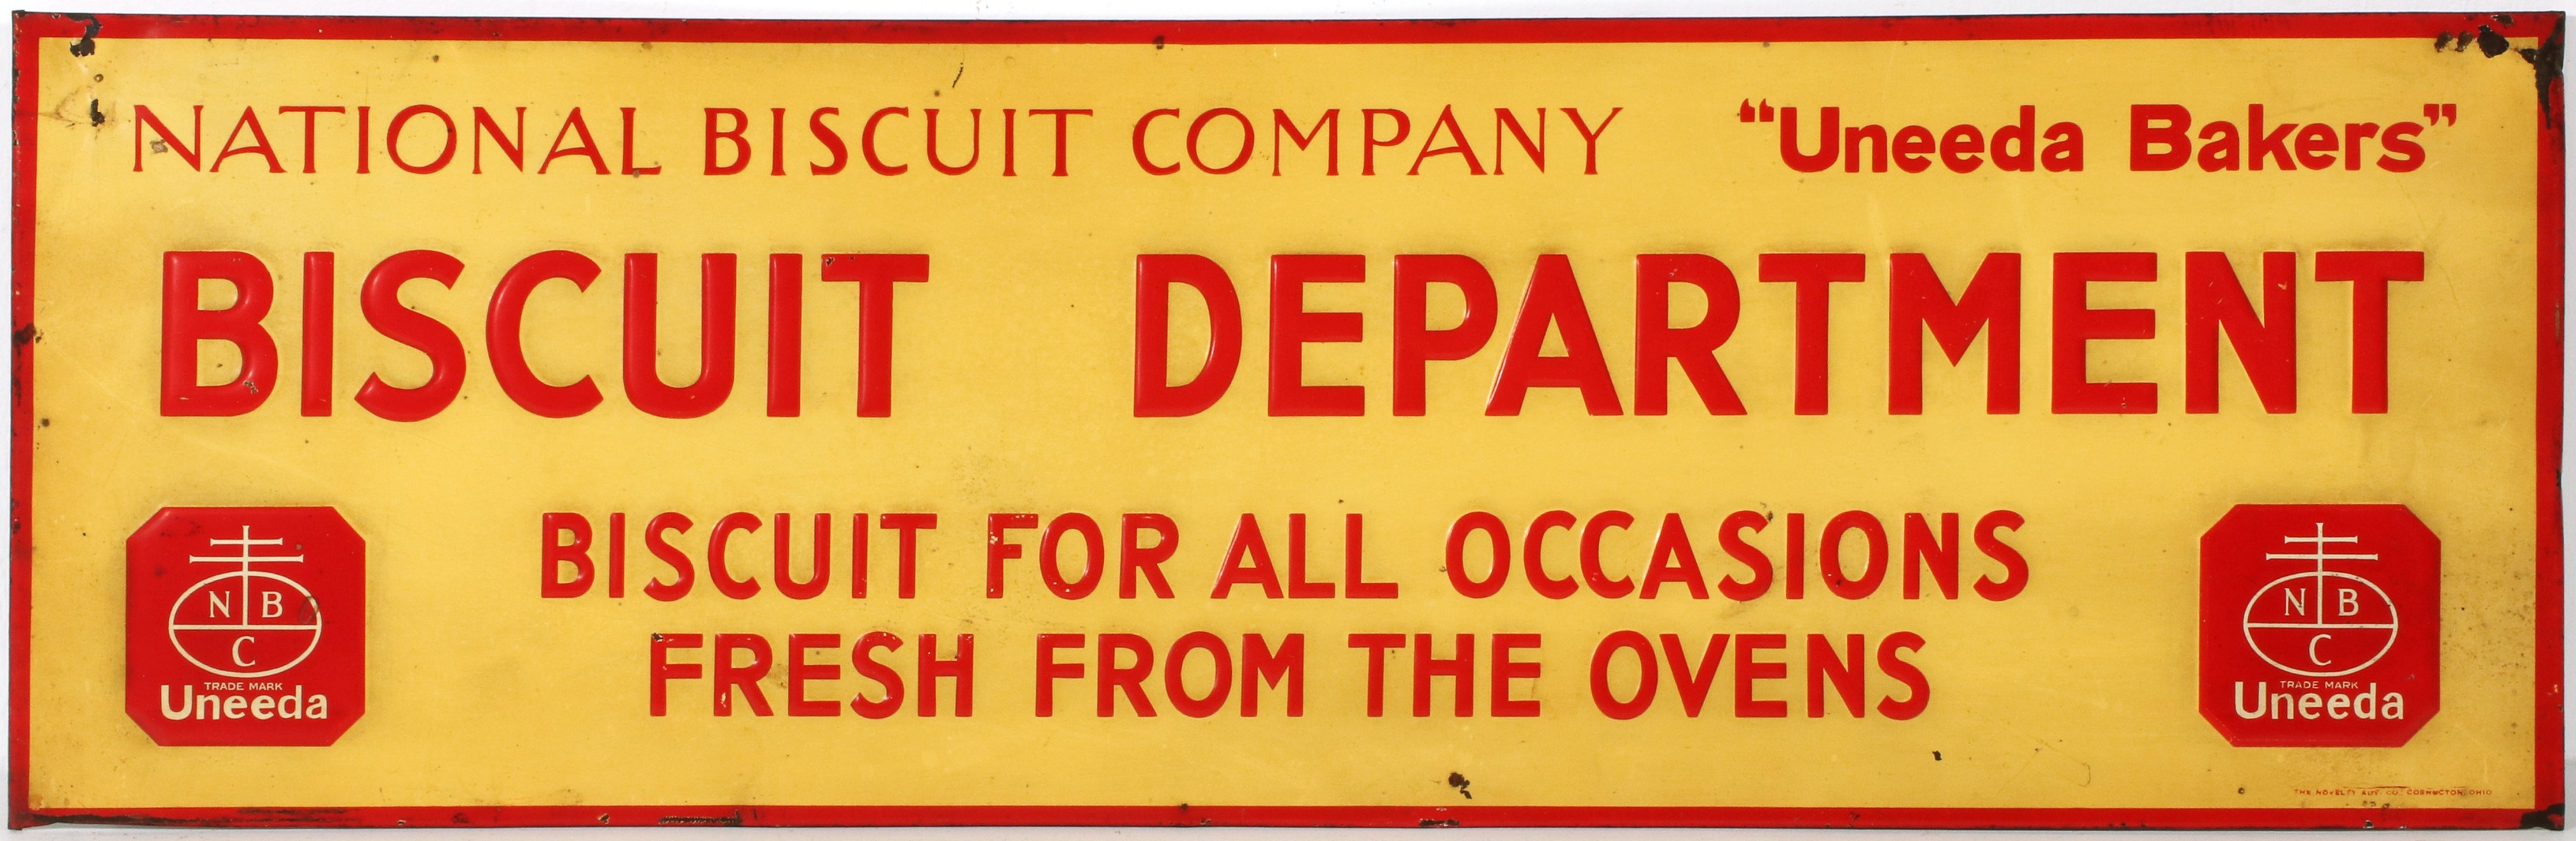 EMBOSSED TIN SIGN FOR THE NATIONAL BISCUIT DEPARTMENT